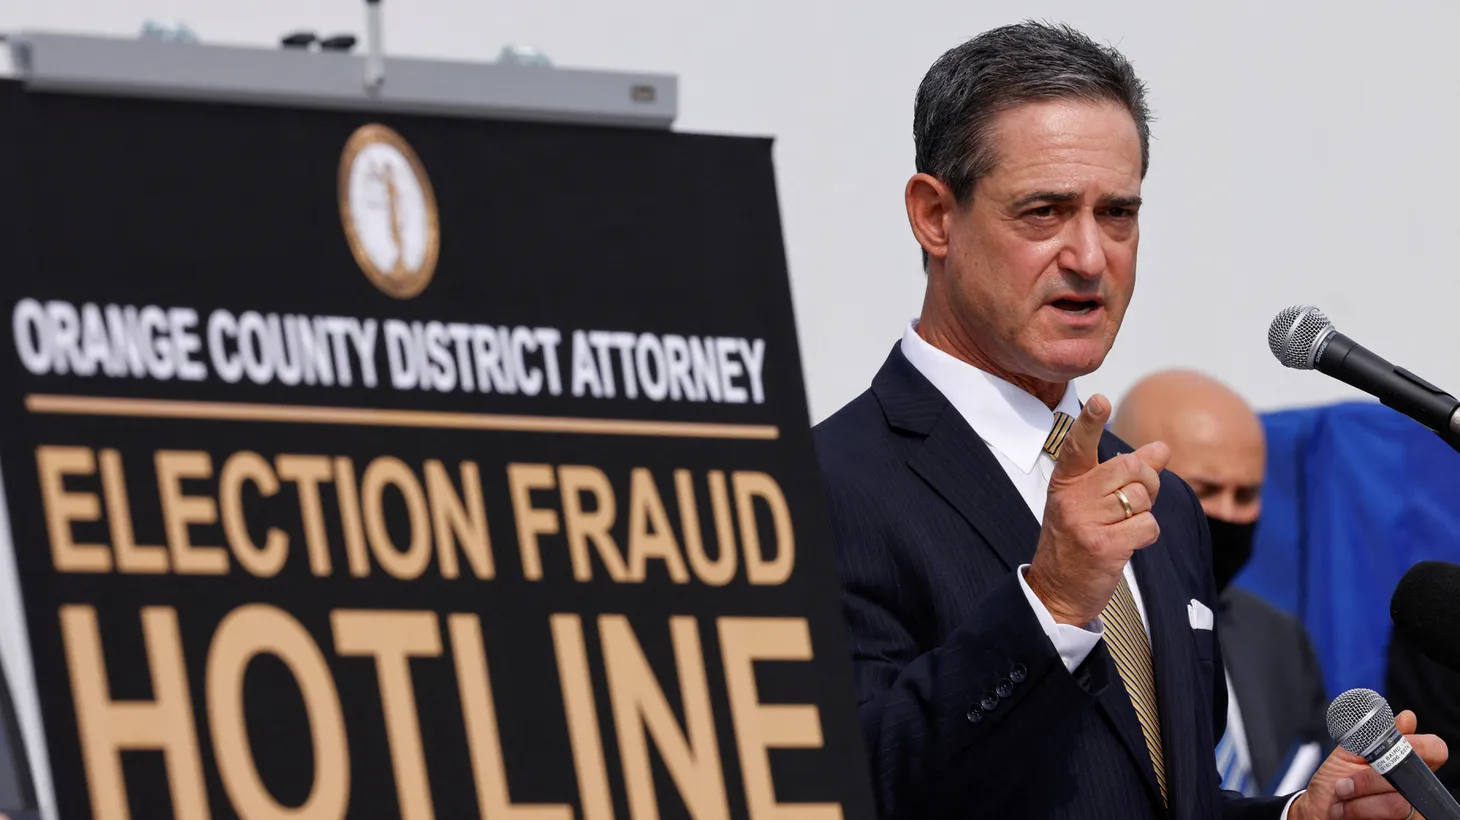 Orange County District Attorney Todd Spitzer speaks on election fraud at the Orange County Registrar of Voters in Santa Ana, California, U.S., October, 5, 2020.